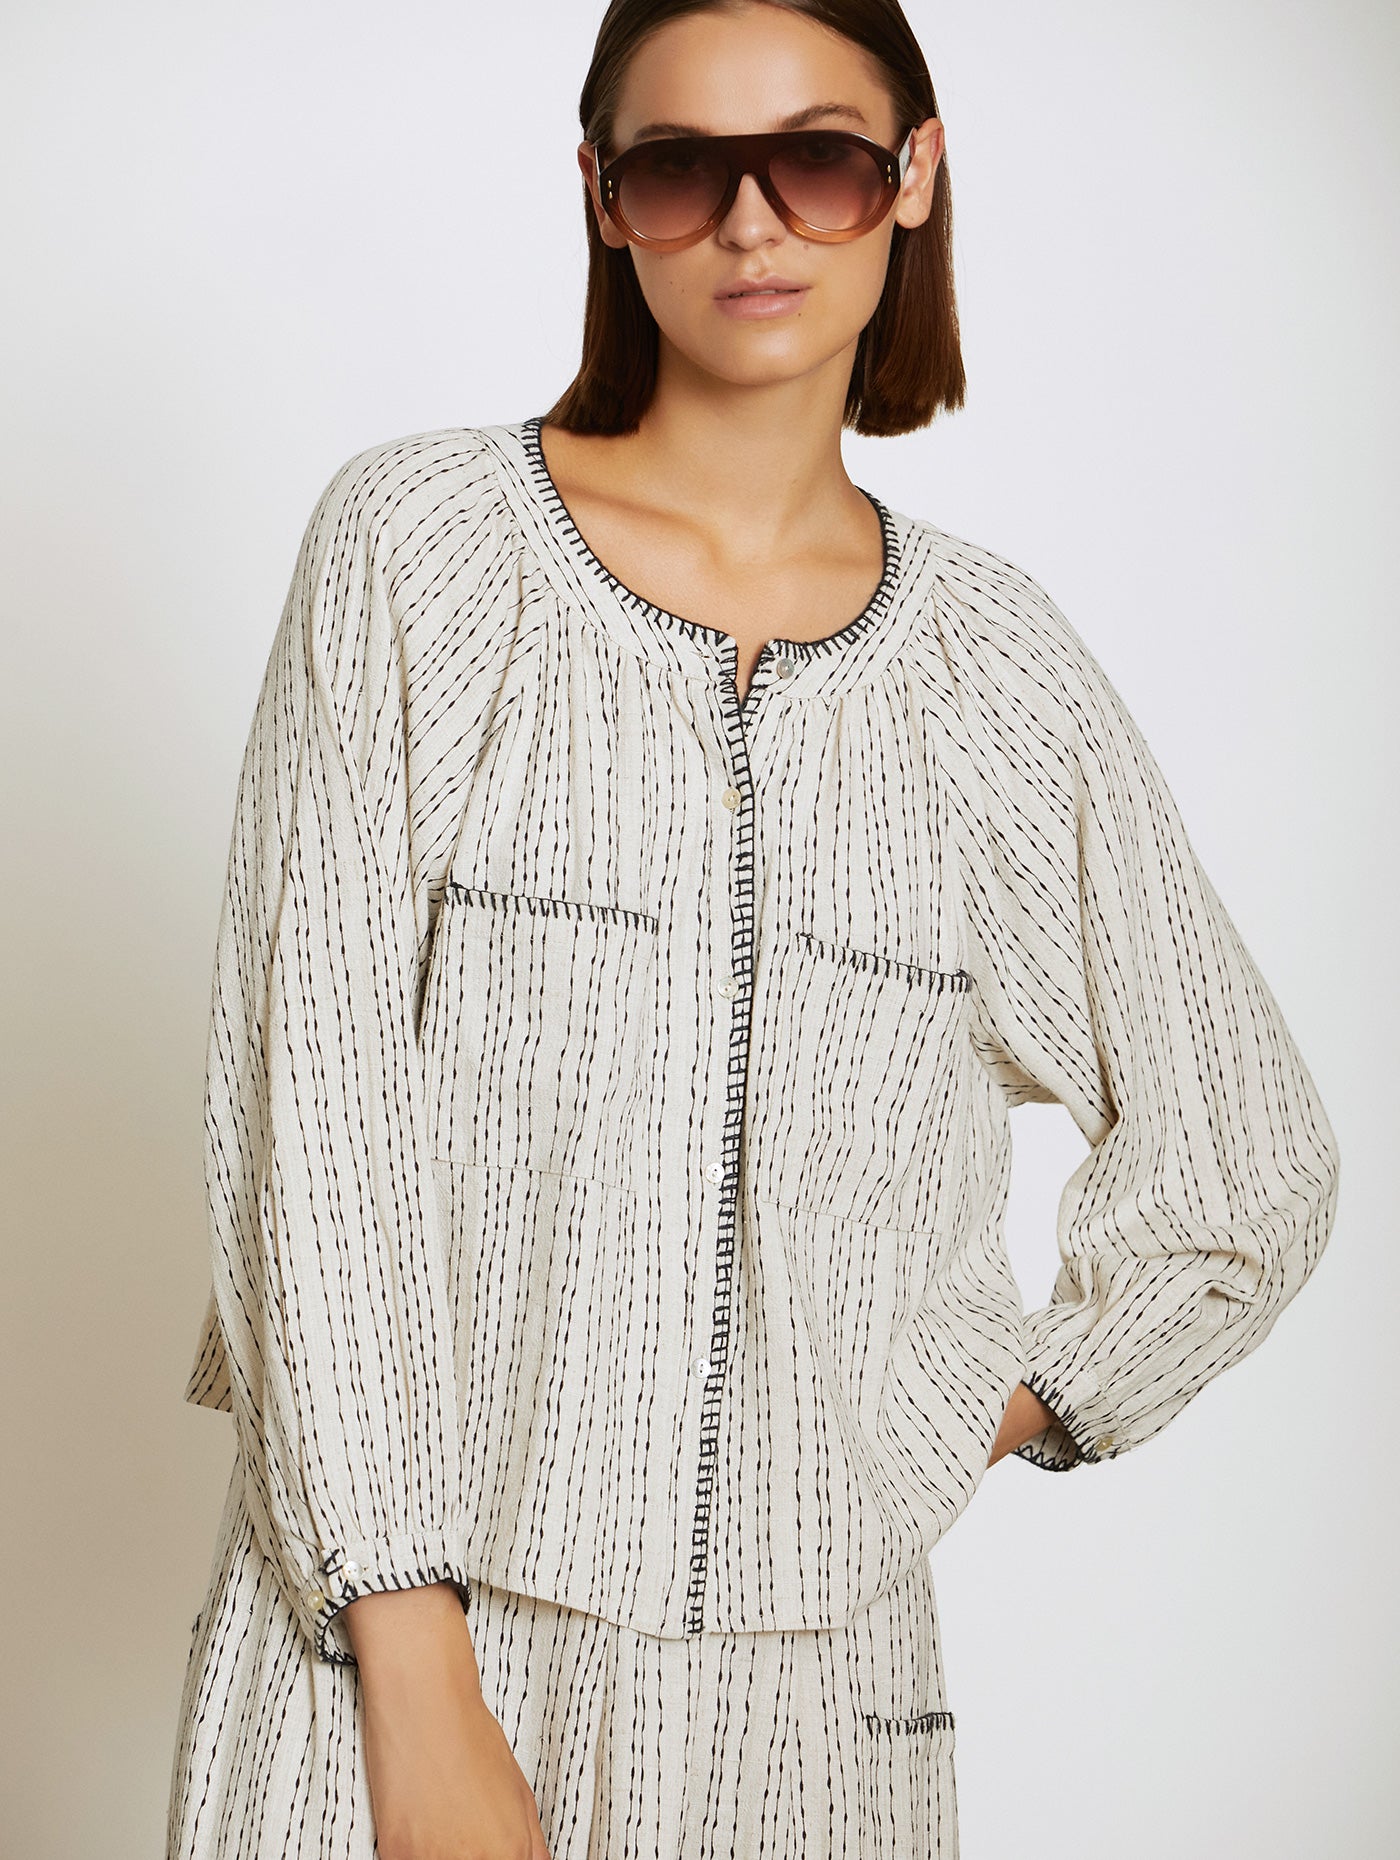 Viscose and linen blend shirt with polka dot print and embroidery detail from Skatie in two colour combinations. This easy to wear blouse also doubles as a jacket. It is super versatile yet classy and elegant. The fit is true to size.